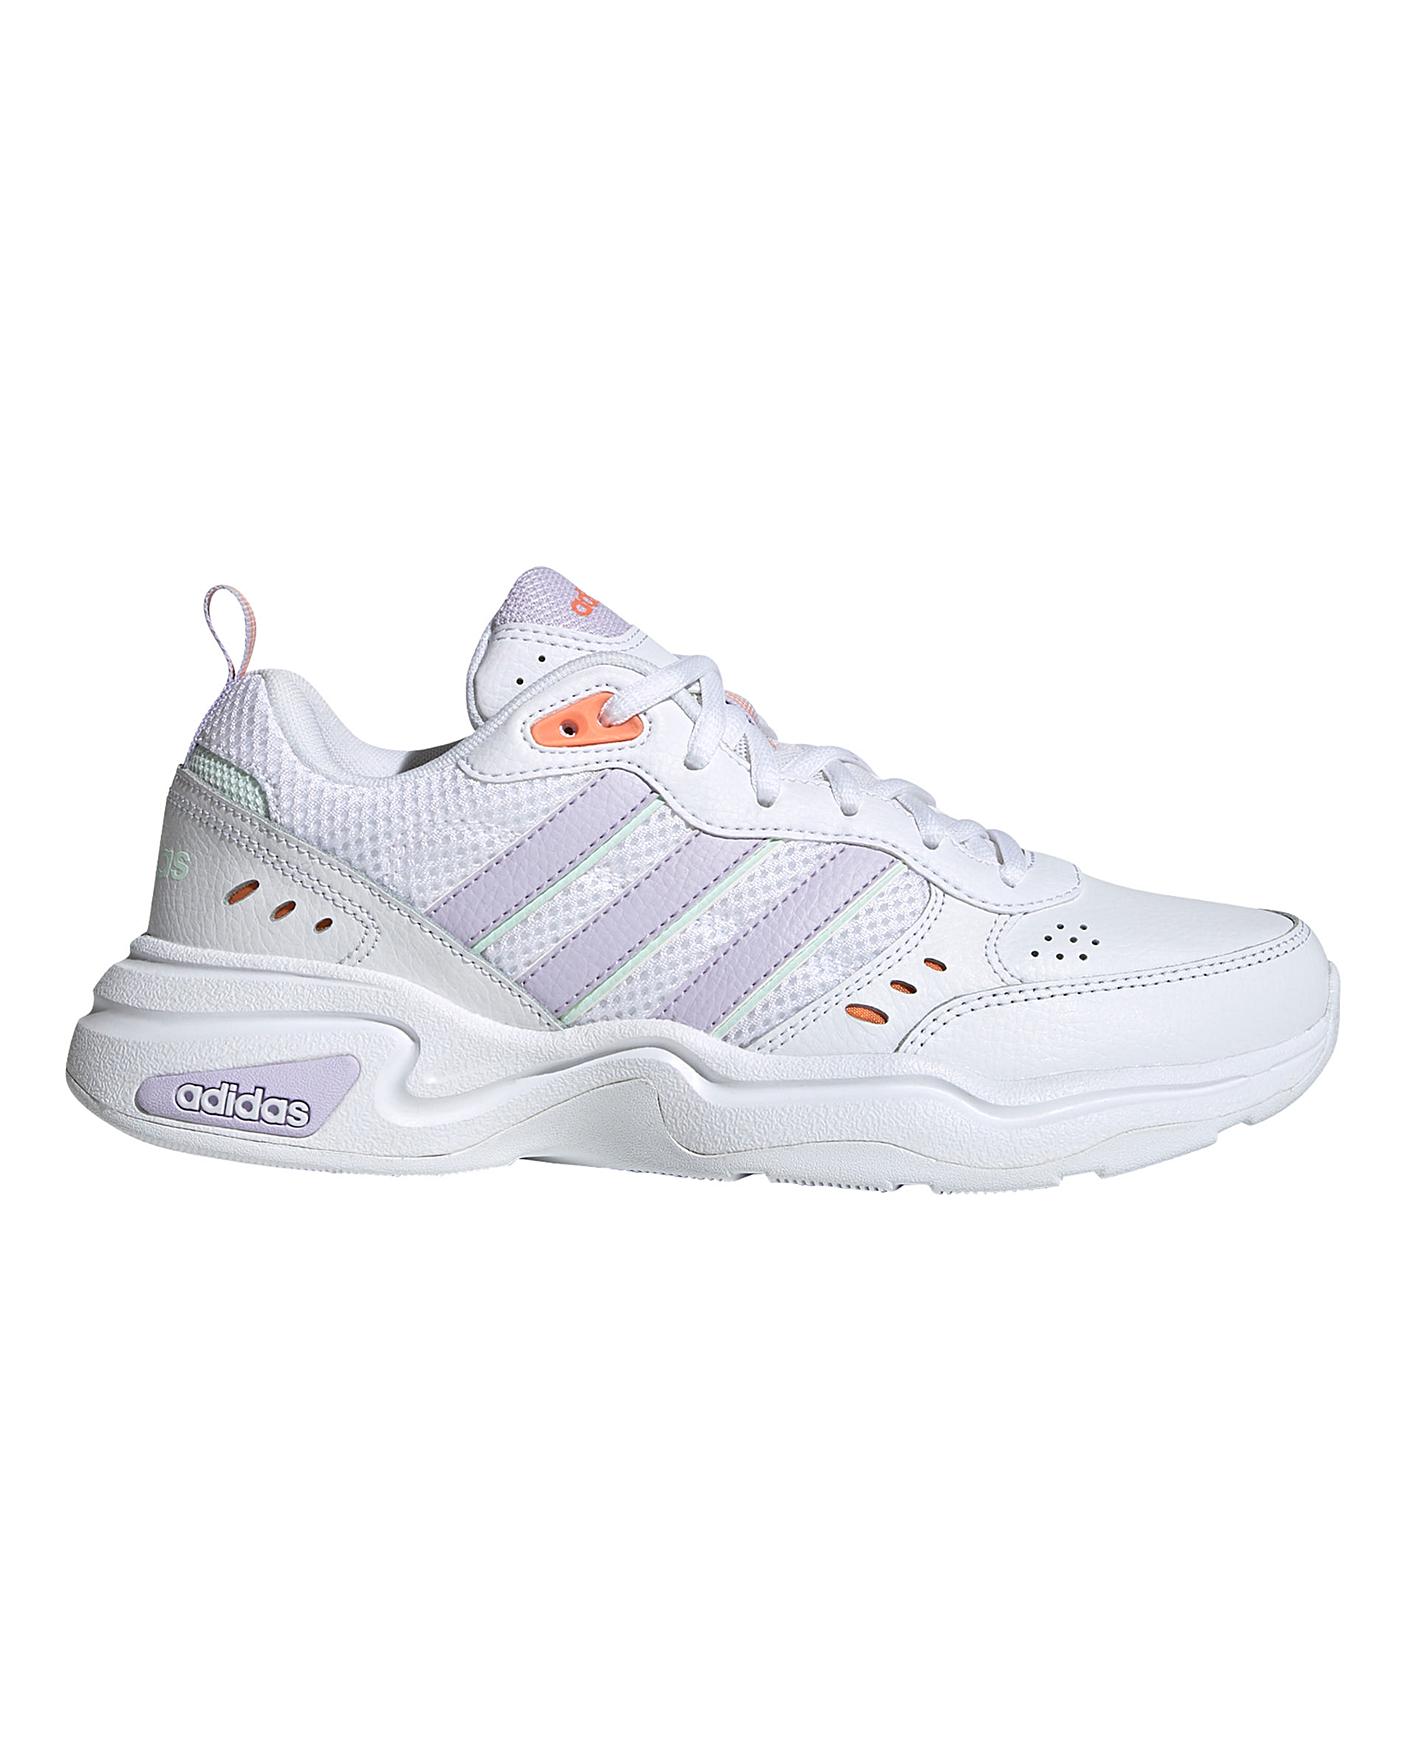 adidas strutter trainers mens